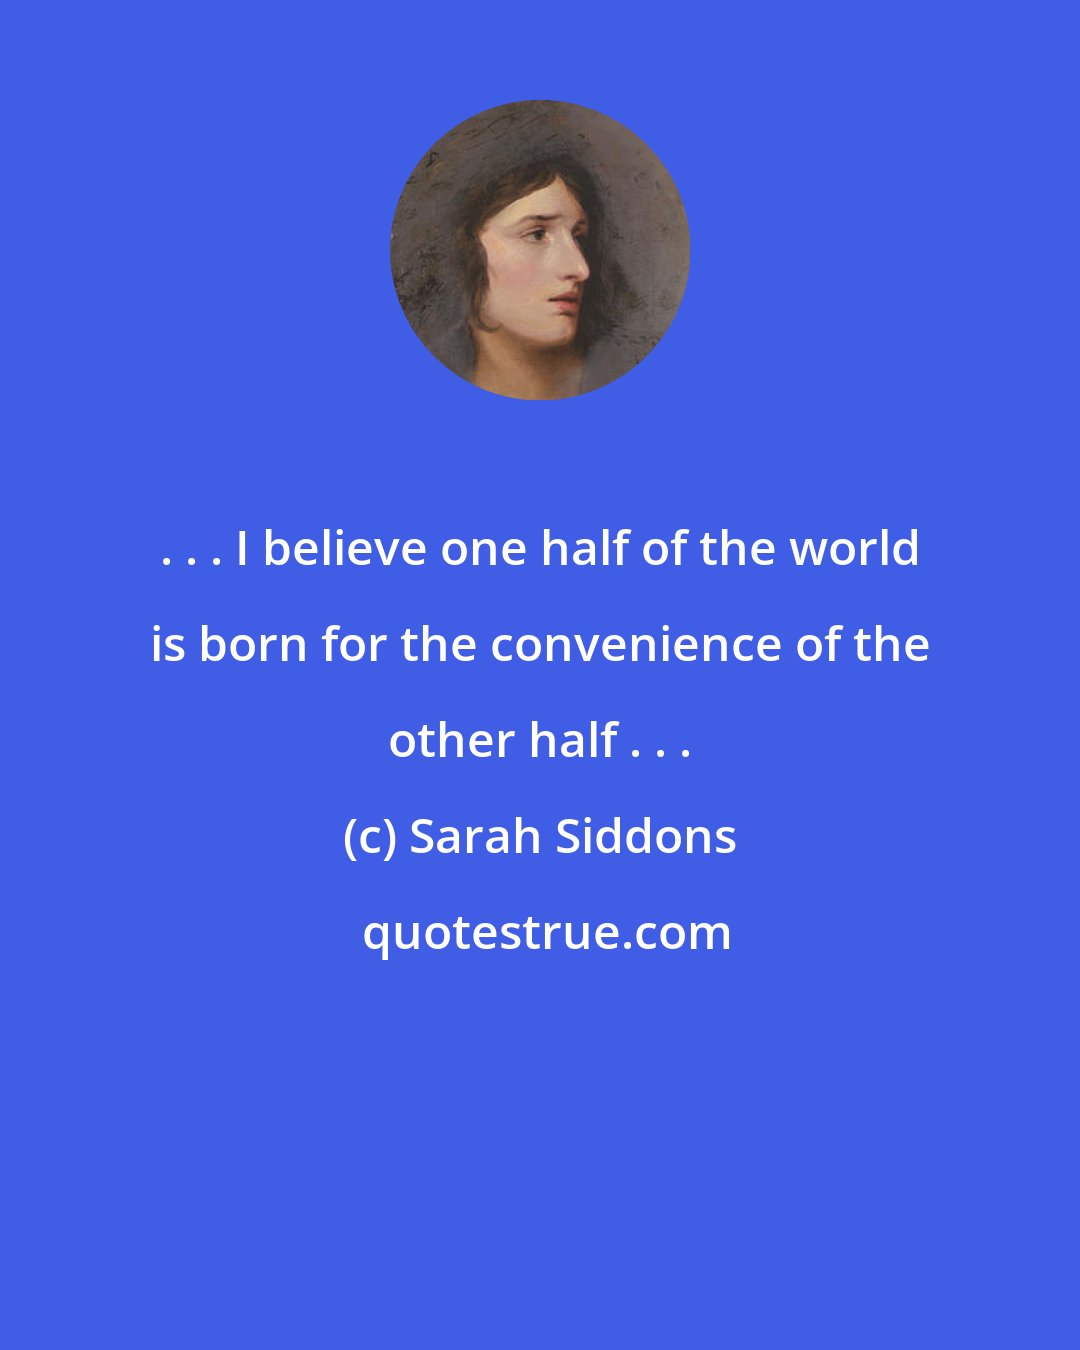 Sarah Siddons: . . . I believe one half of the world is born for the convenience of the other half . . .